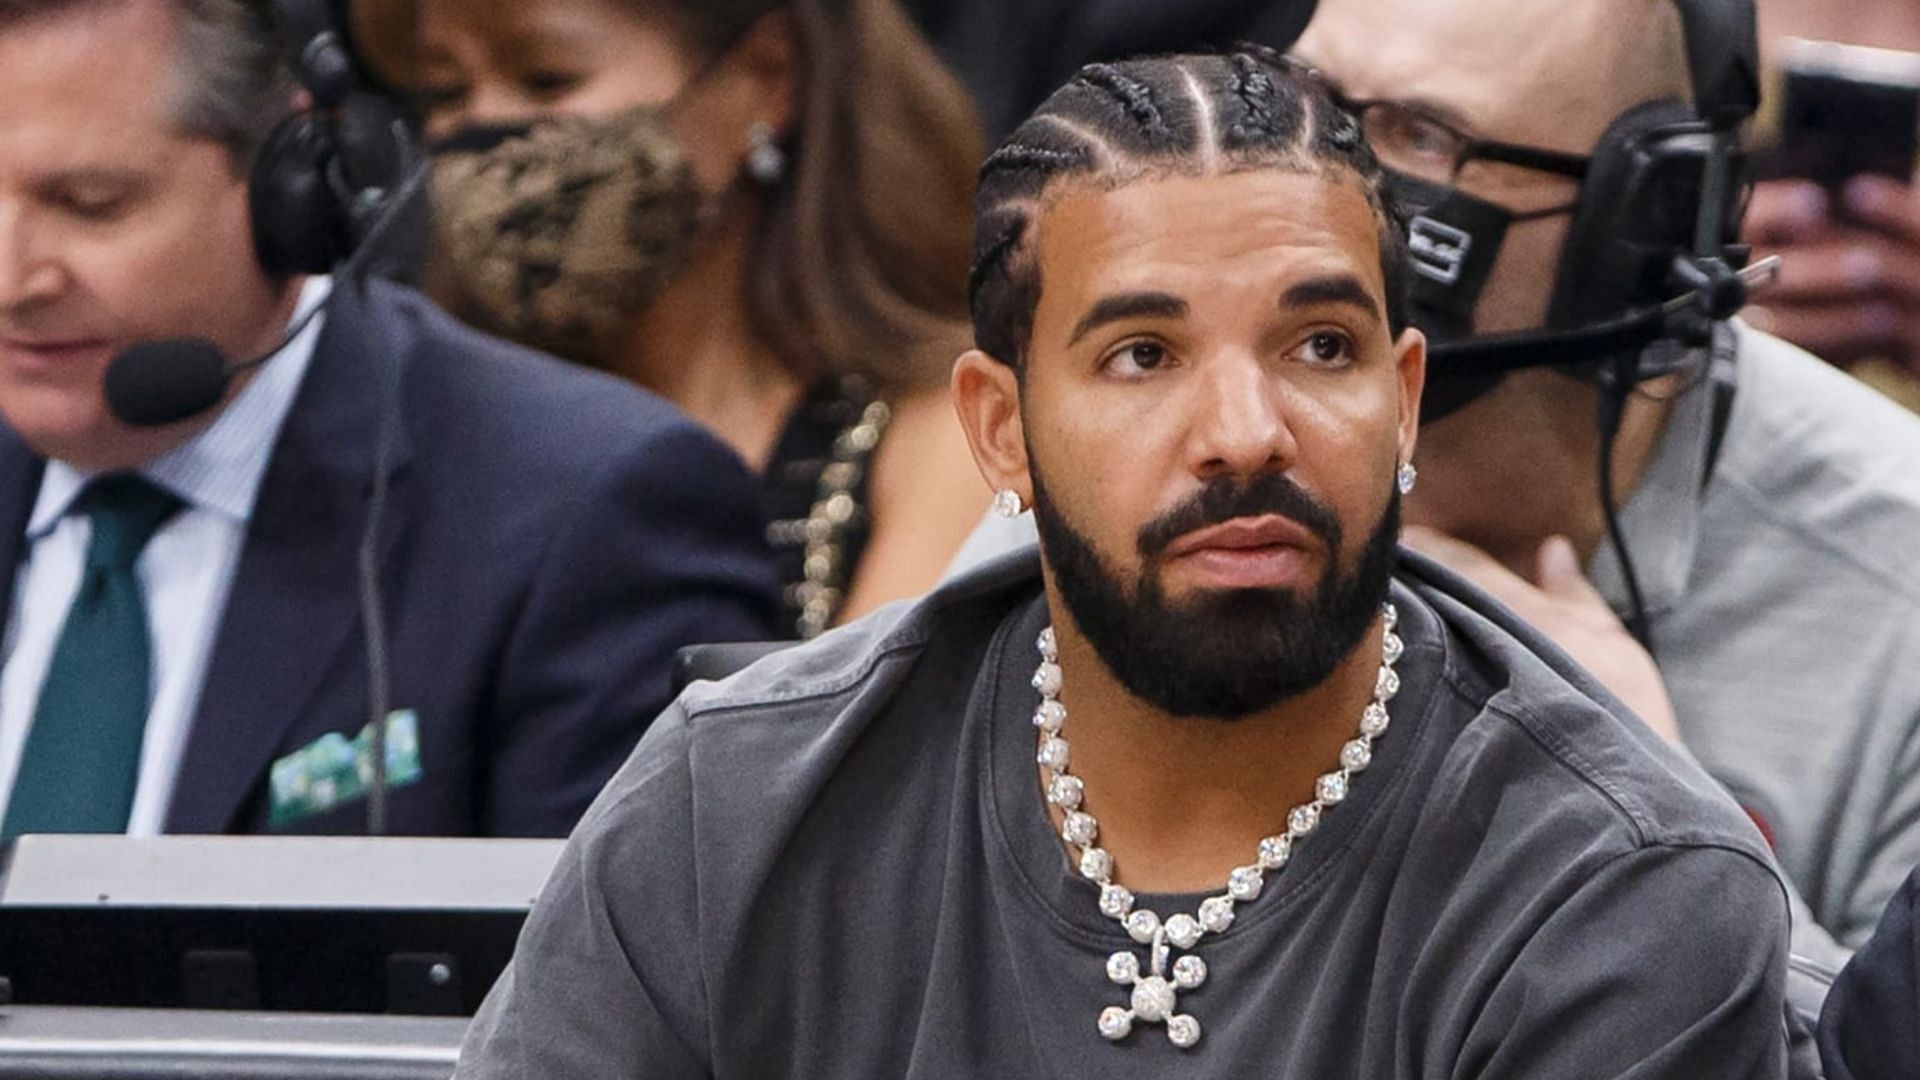 Celebrities Like Drake Are Being Criticised For Their Private Jet Emissions